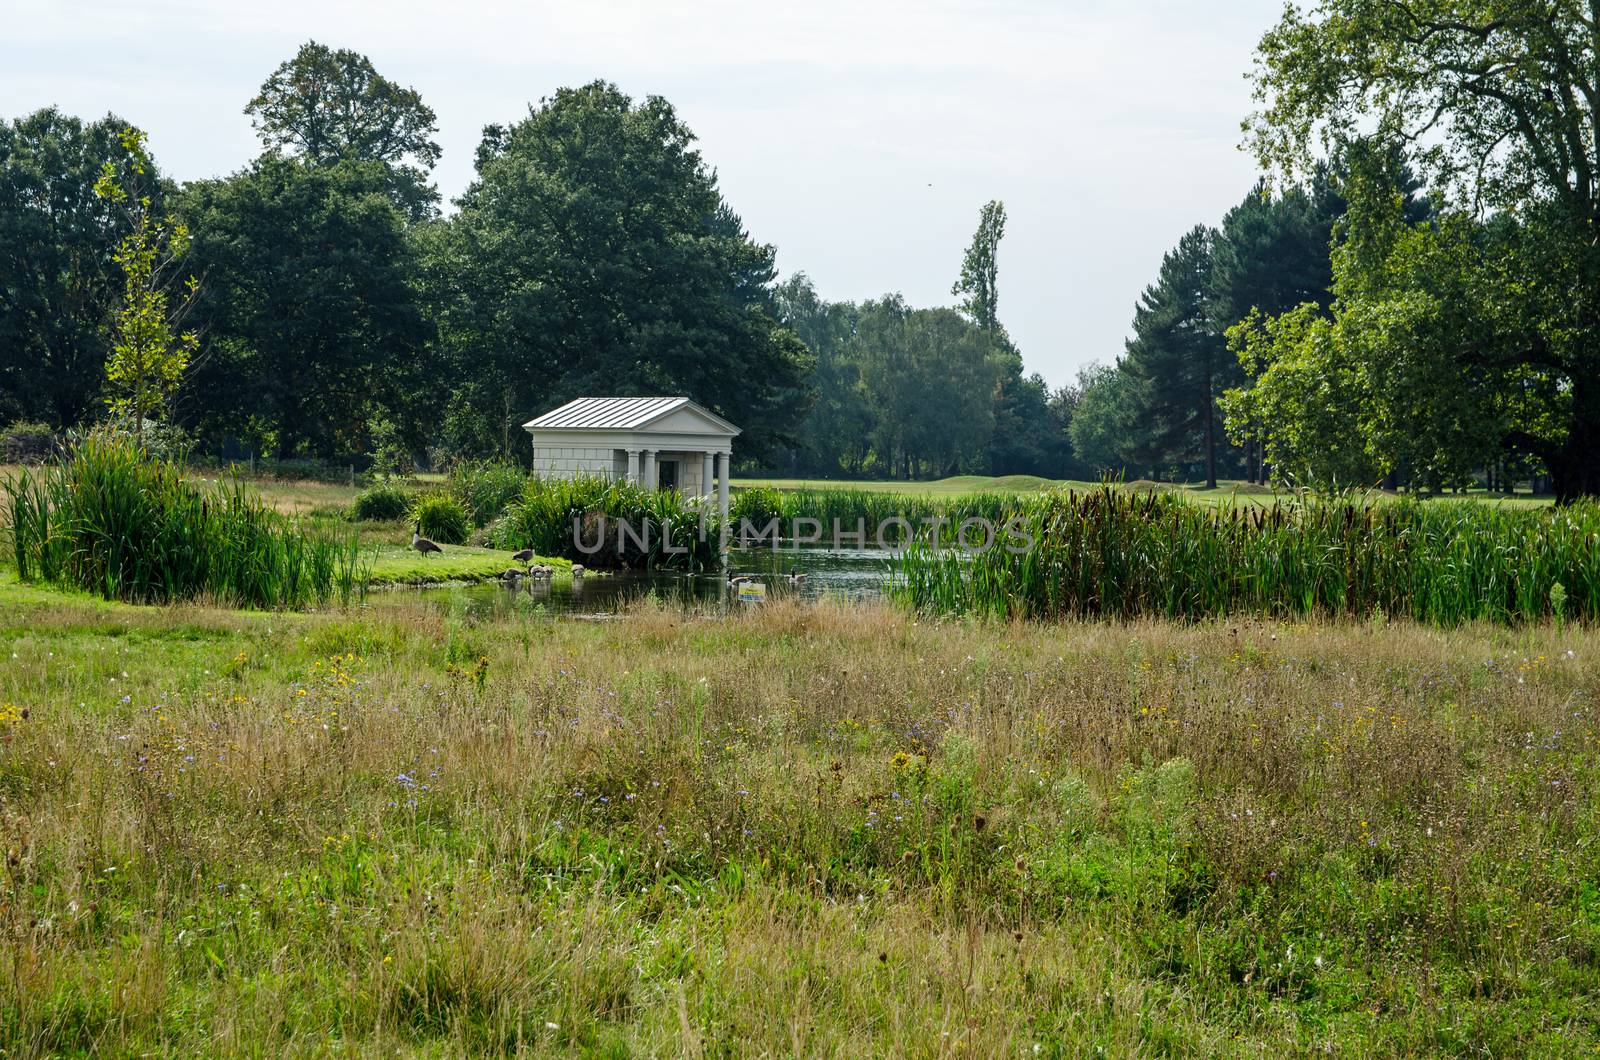 View across the meadow and lake looking towards the Classical style temple used as a boat house at the historic King's Observatory in Old Deer Park, Richond Upon Thames on a sunny summer day